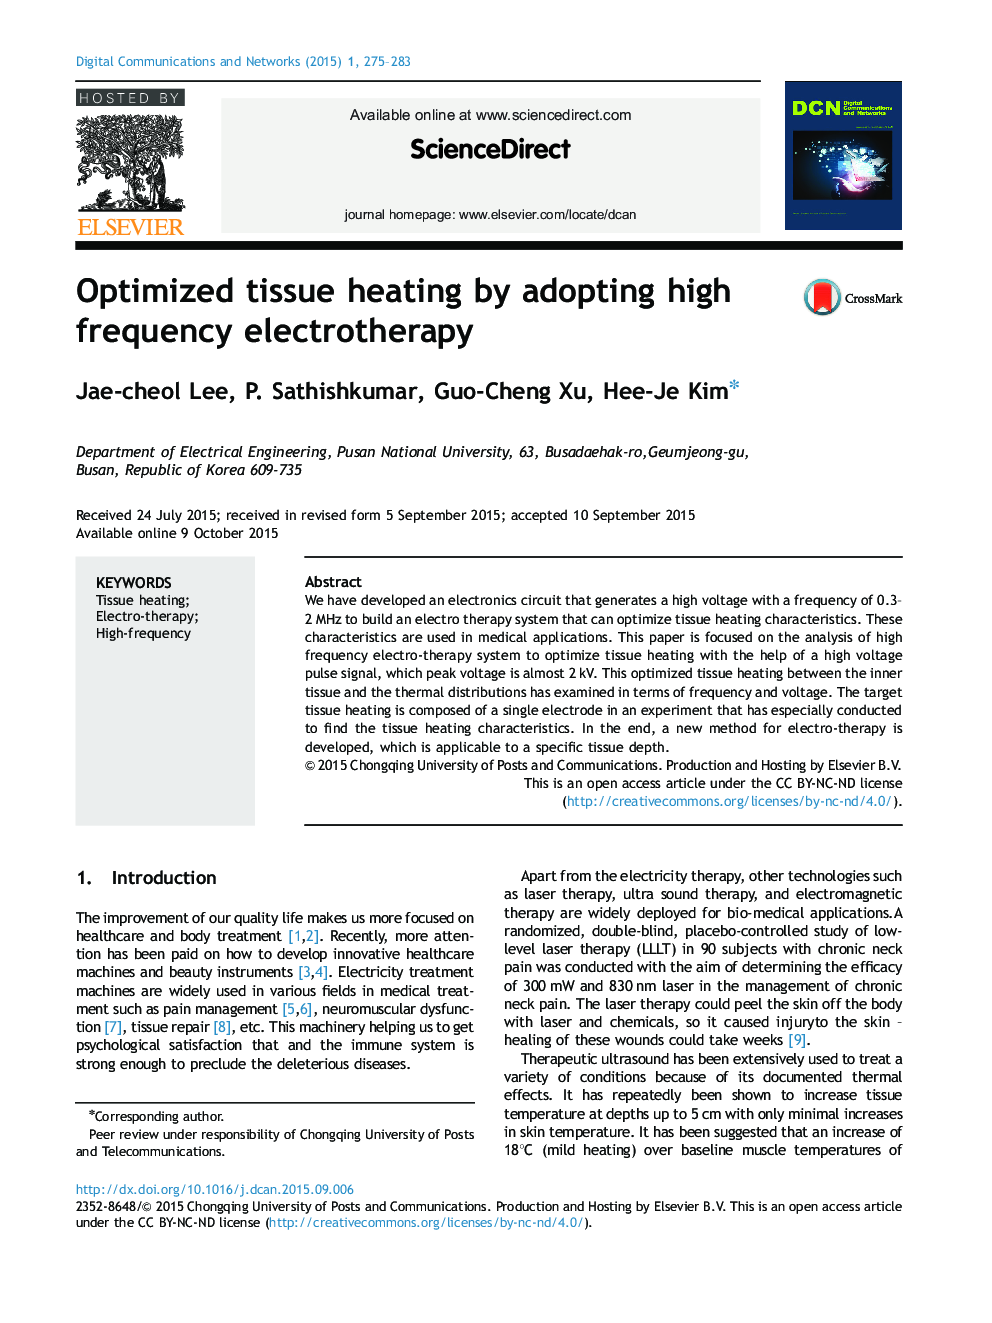 Optimized tissue heating by adopting high frequency electrotherapy 